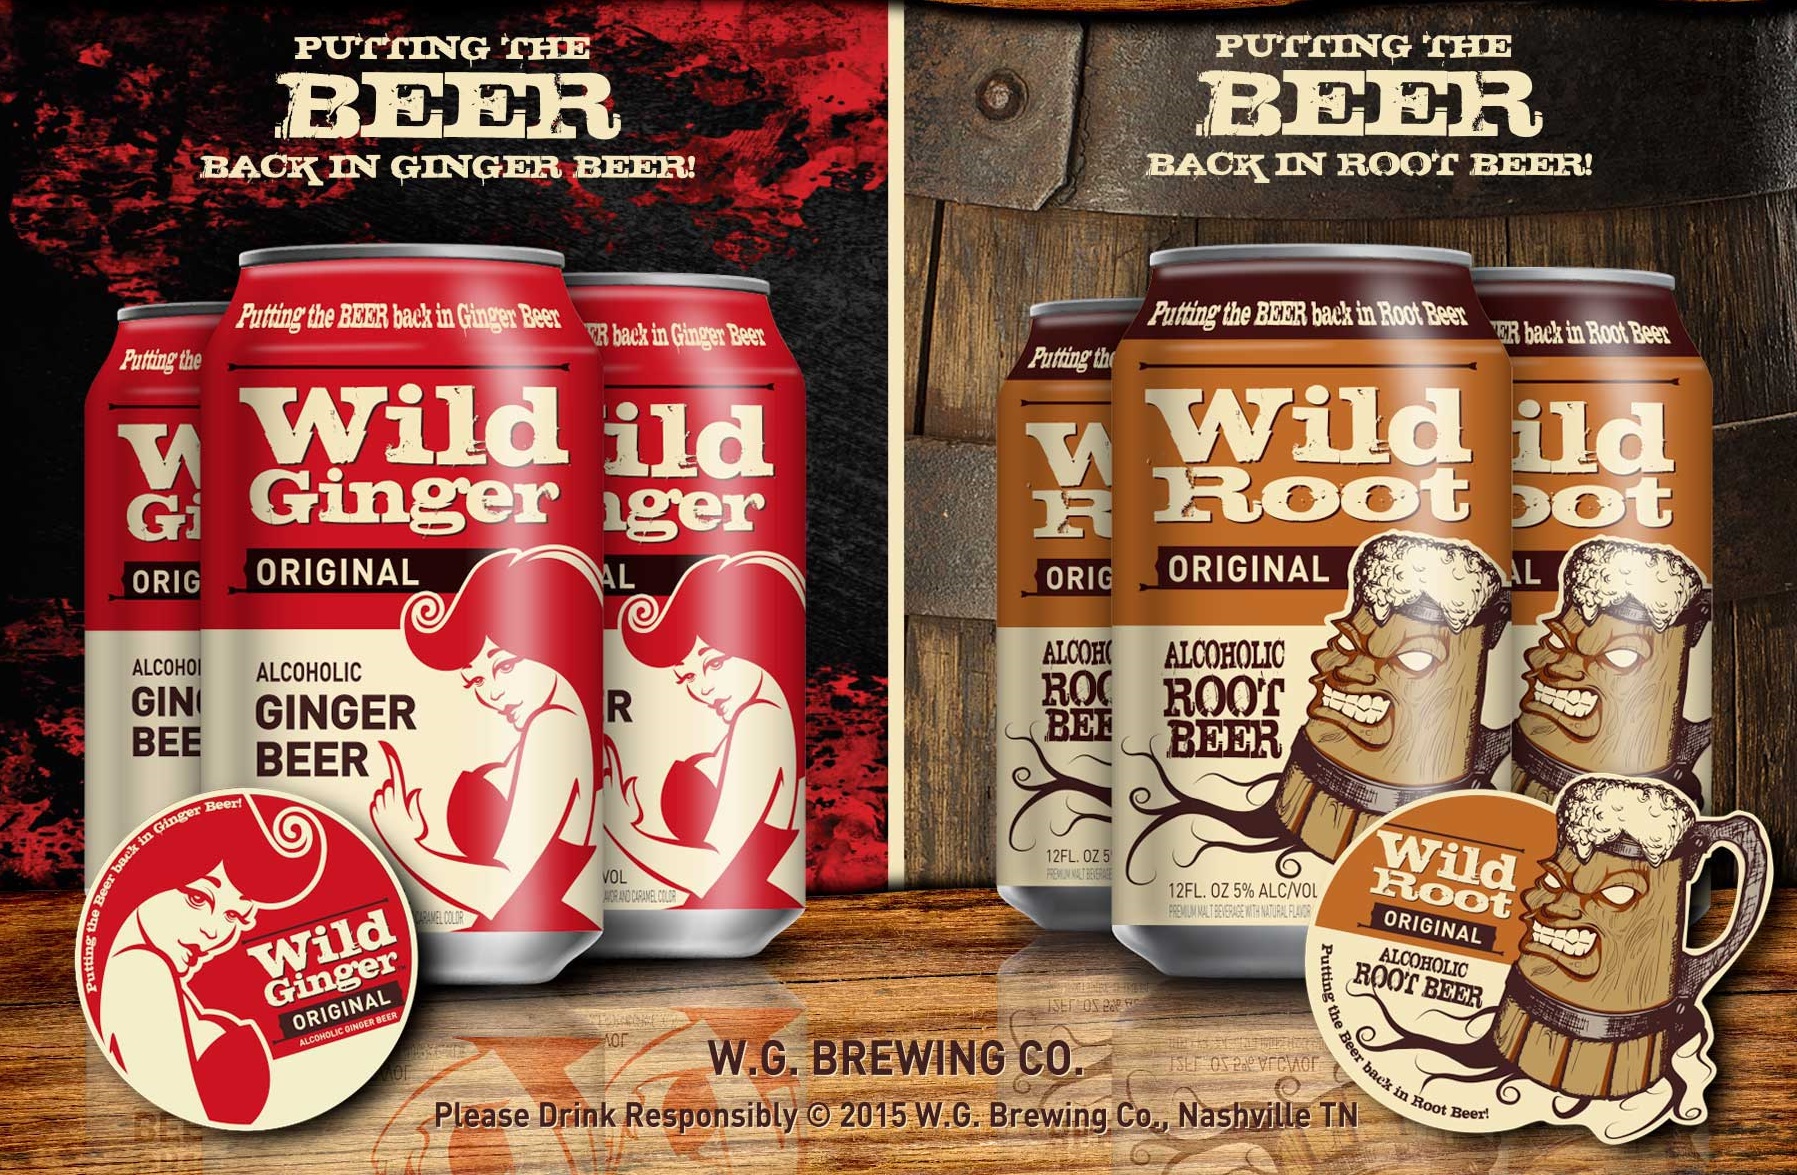 WG Brewing Launches Wild Docta' and Wild Sit Russ